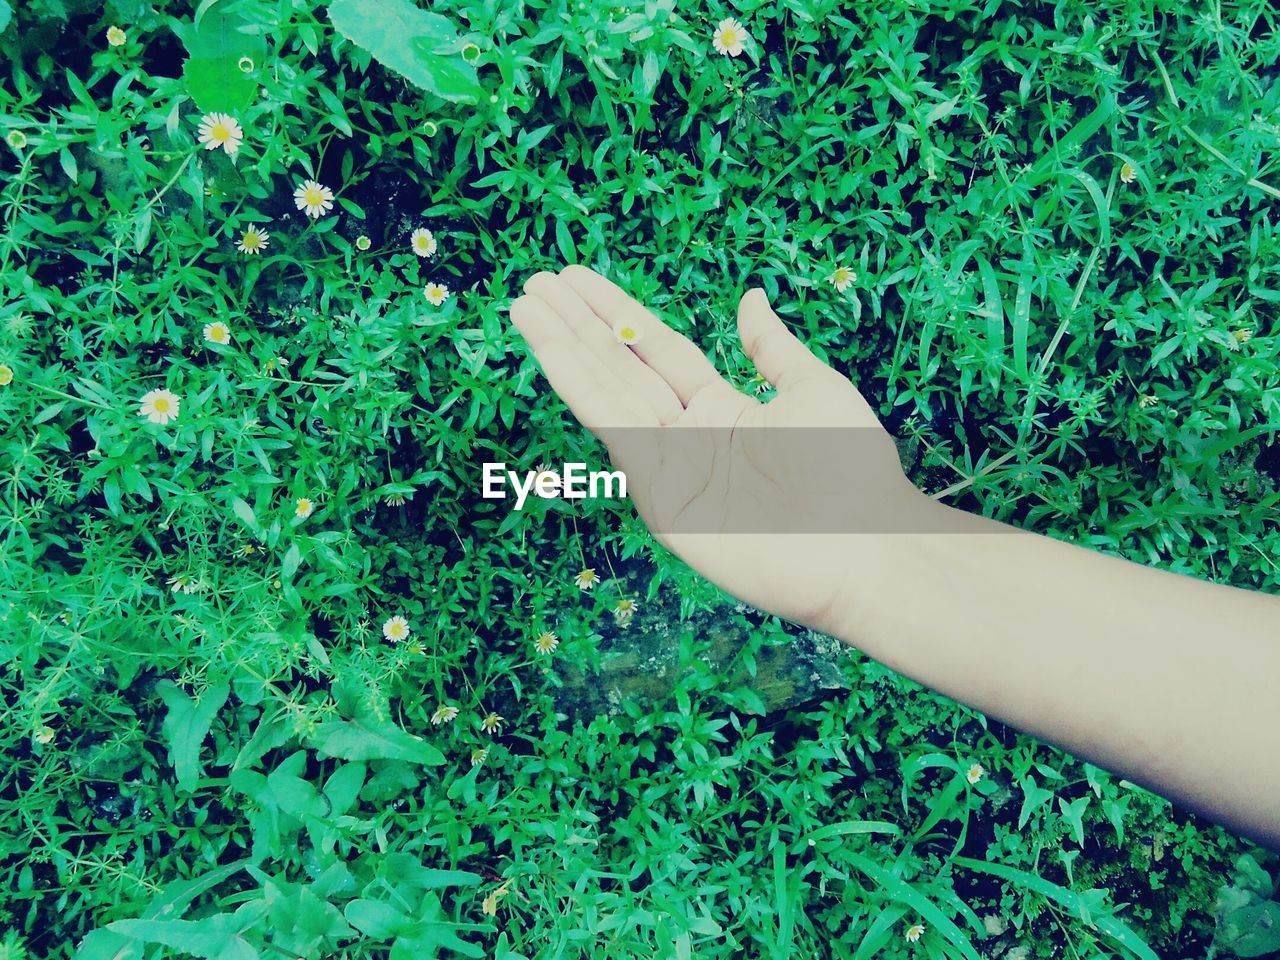 Cropped image of hand holding small flower on field